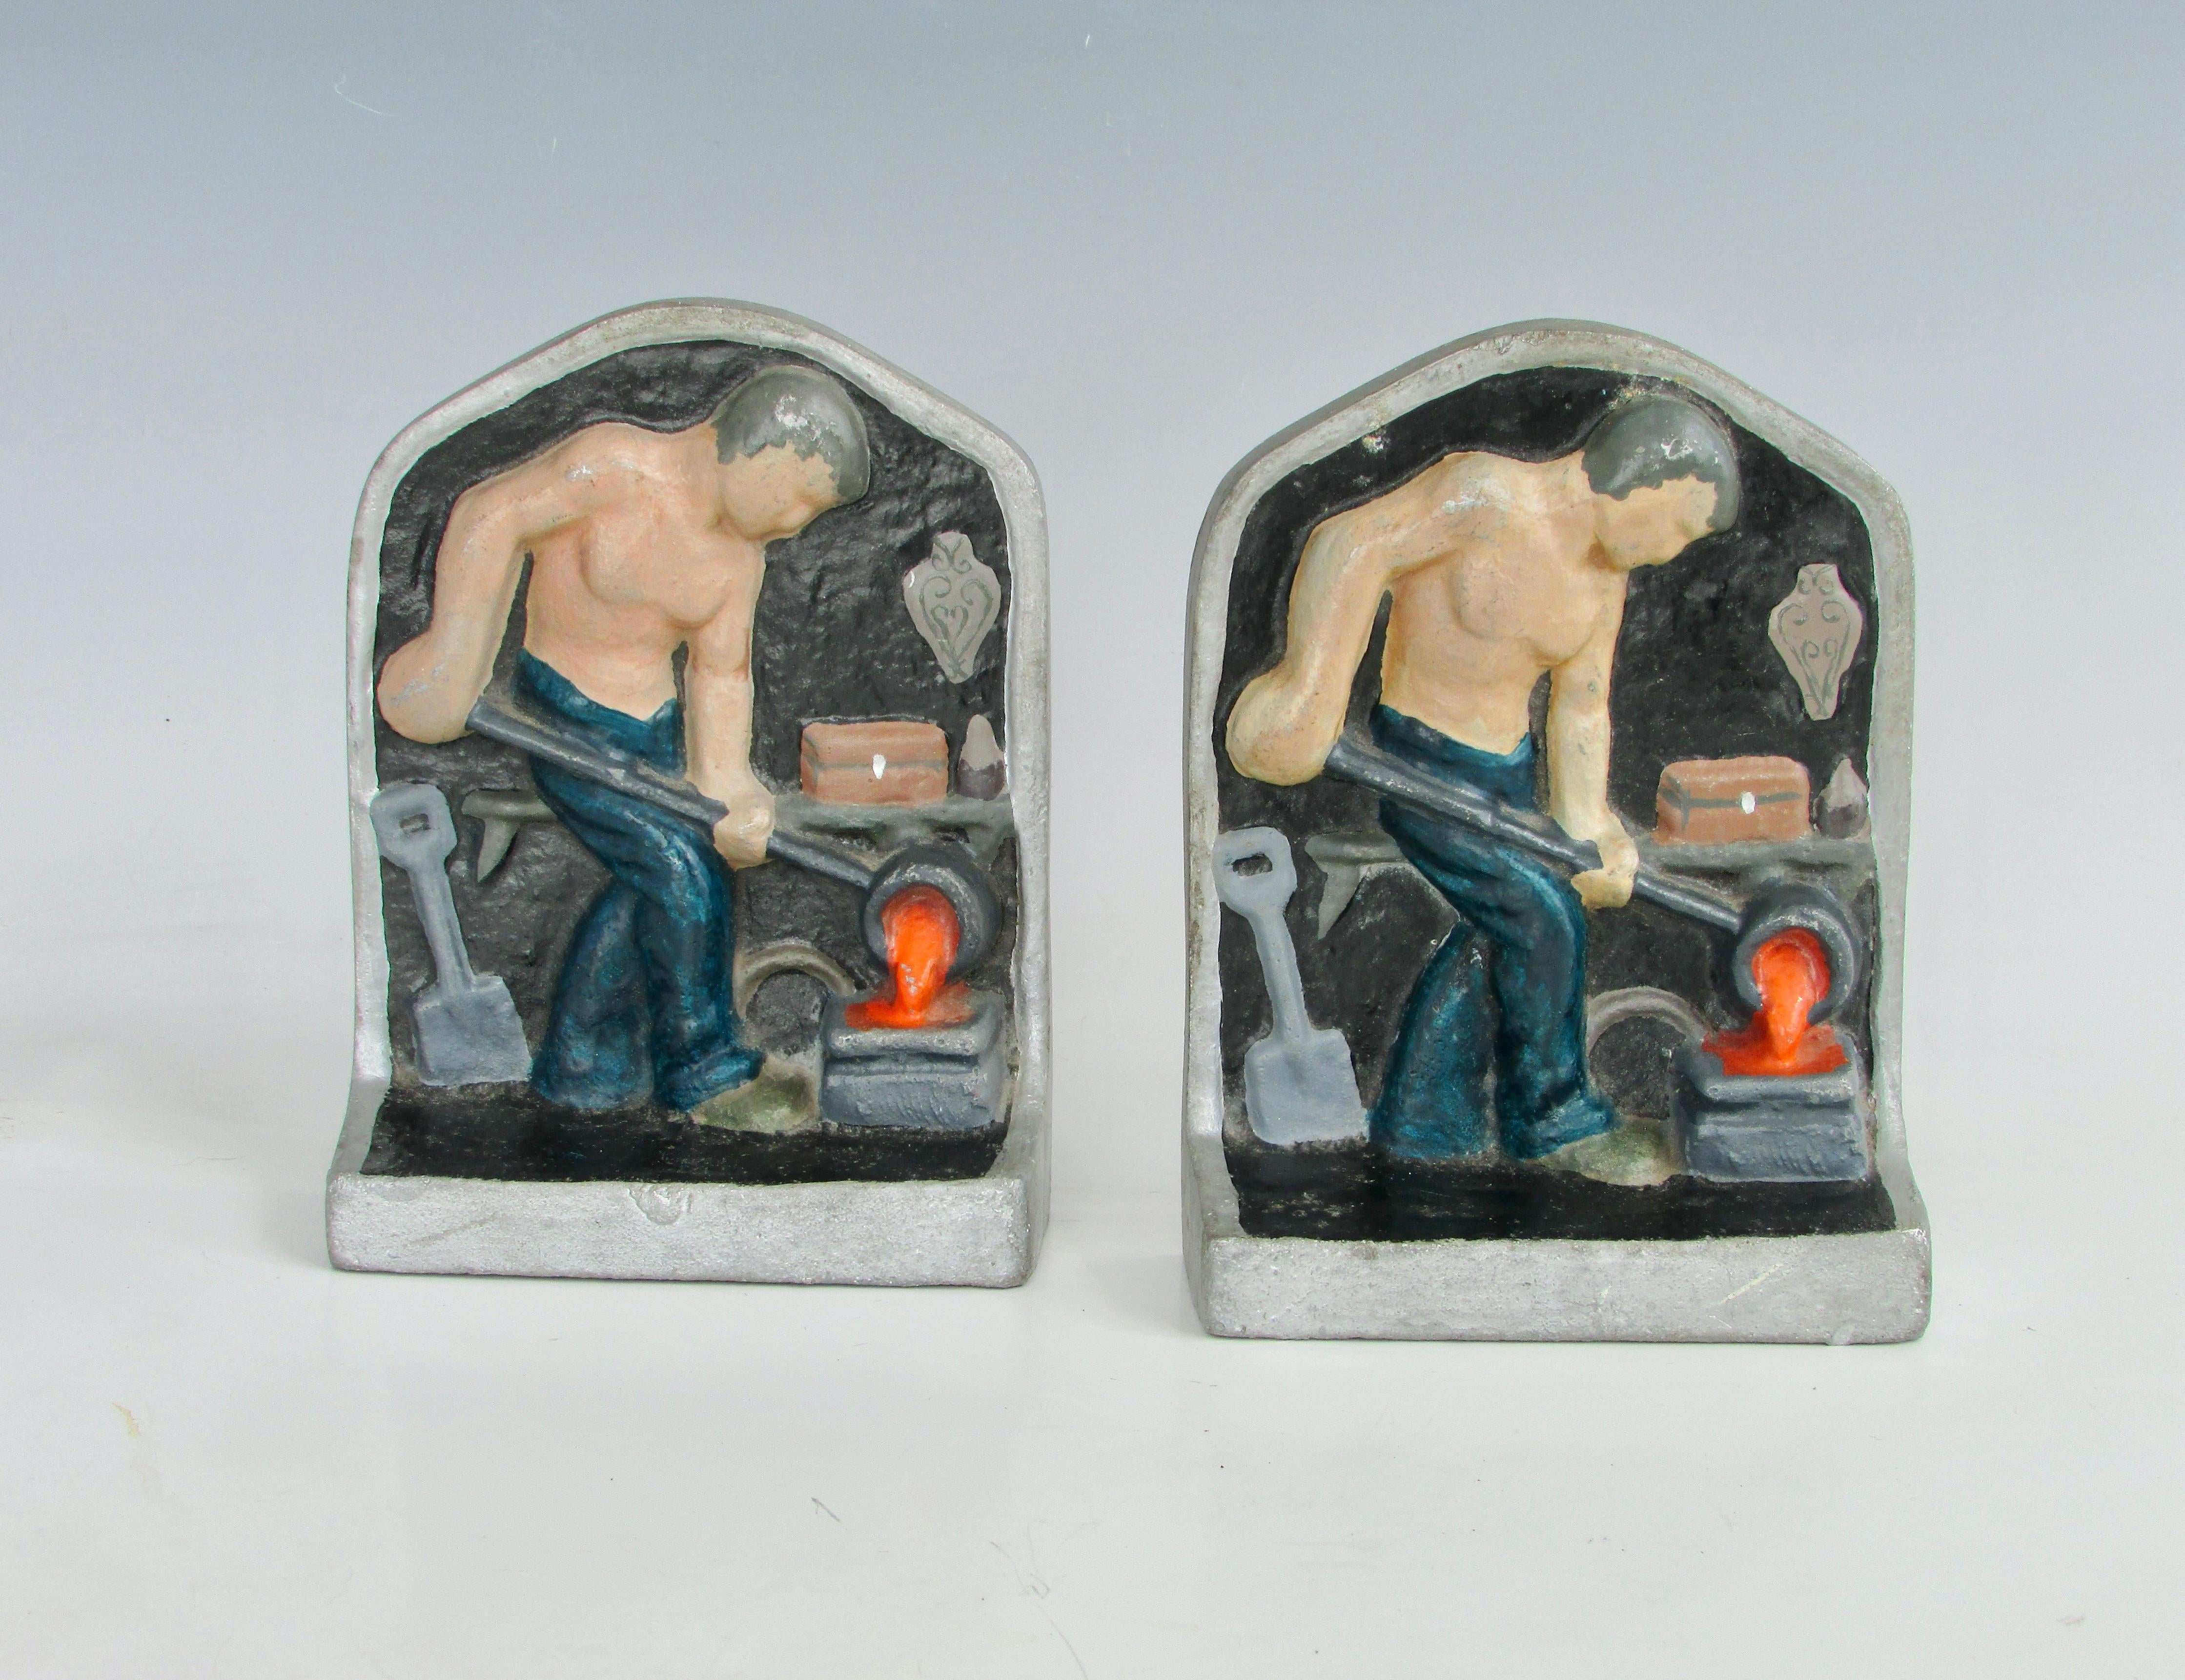 Pair of industrial themed cast aluminum bookends. Both pieces depict bare chested man in a forge setting pouring molten metal from crucible into a mold.